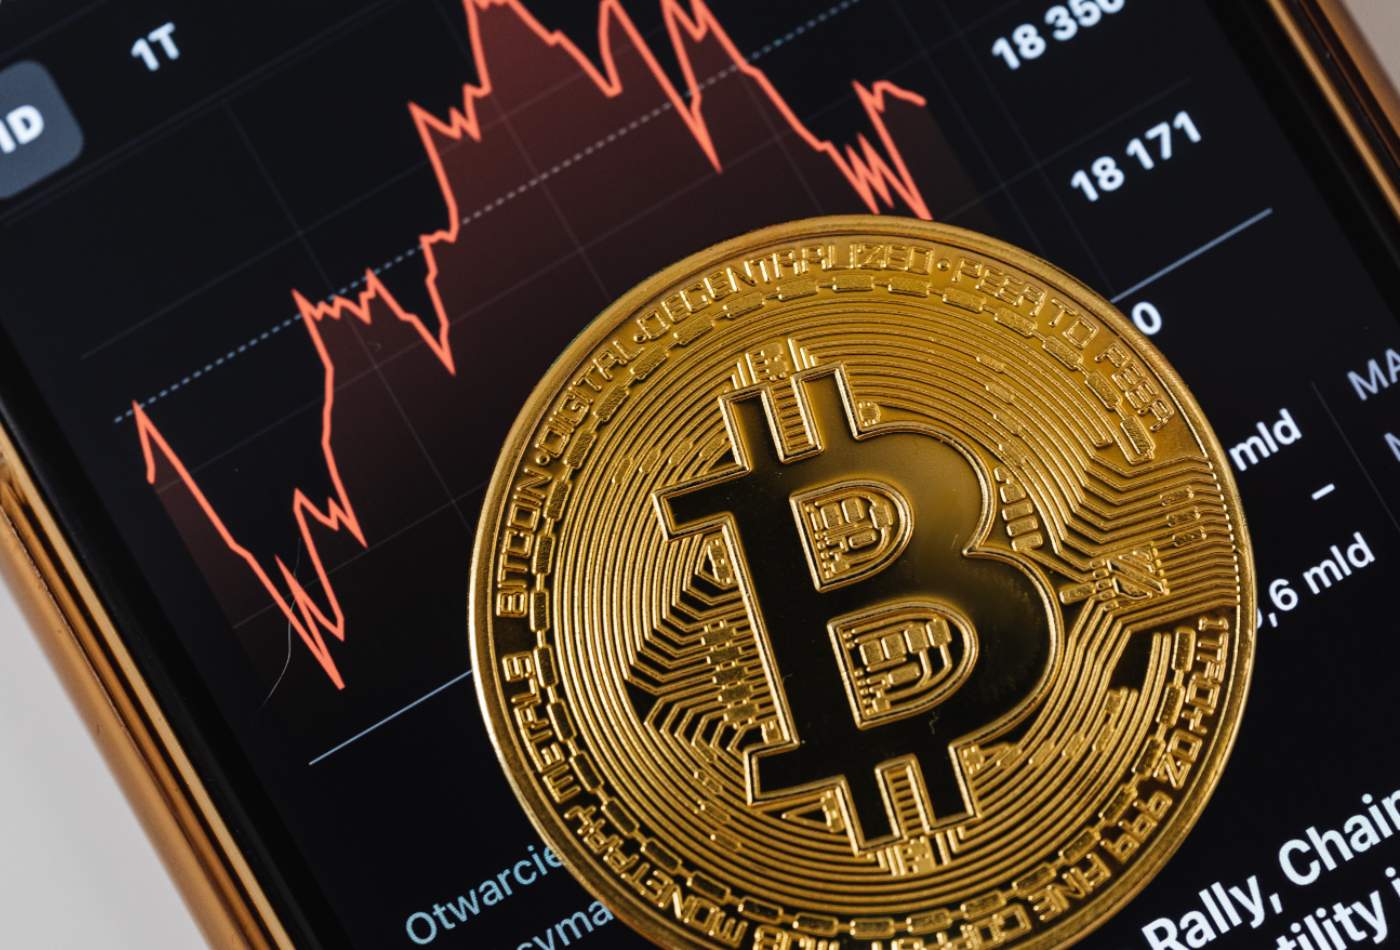 Bitcoin Btc Price Prediction 2022 2030 Why Is It Going Down